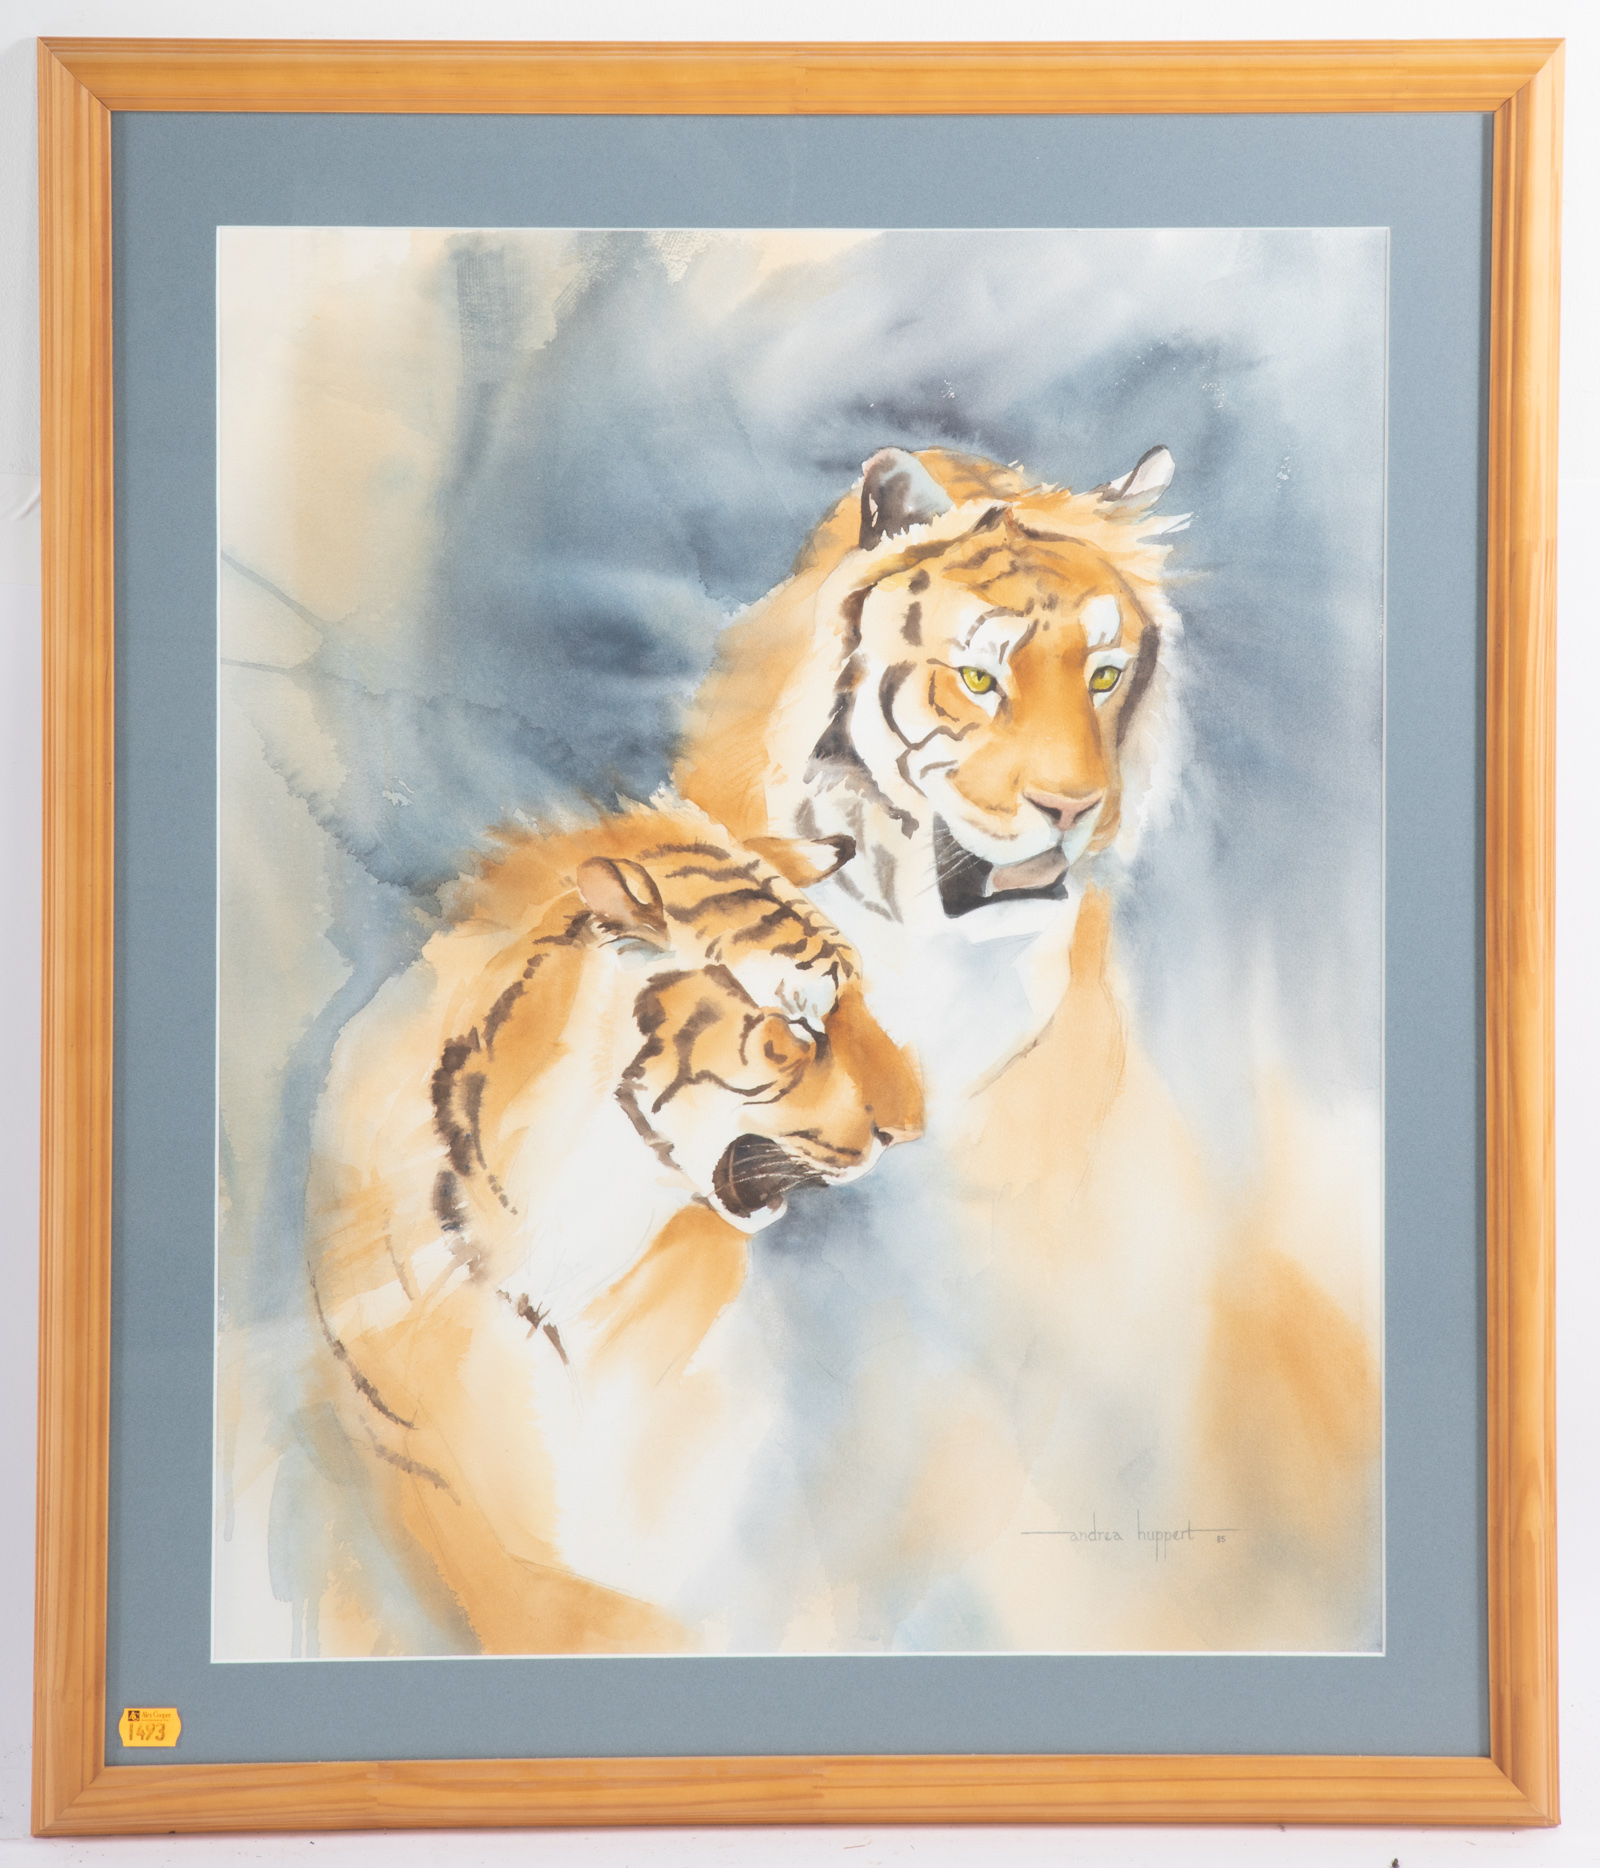 ANDREA HUPPERT. TWO TIGERS, WATERCOLOR